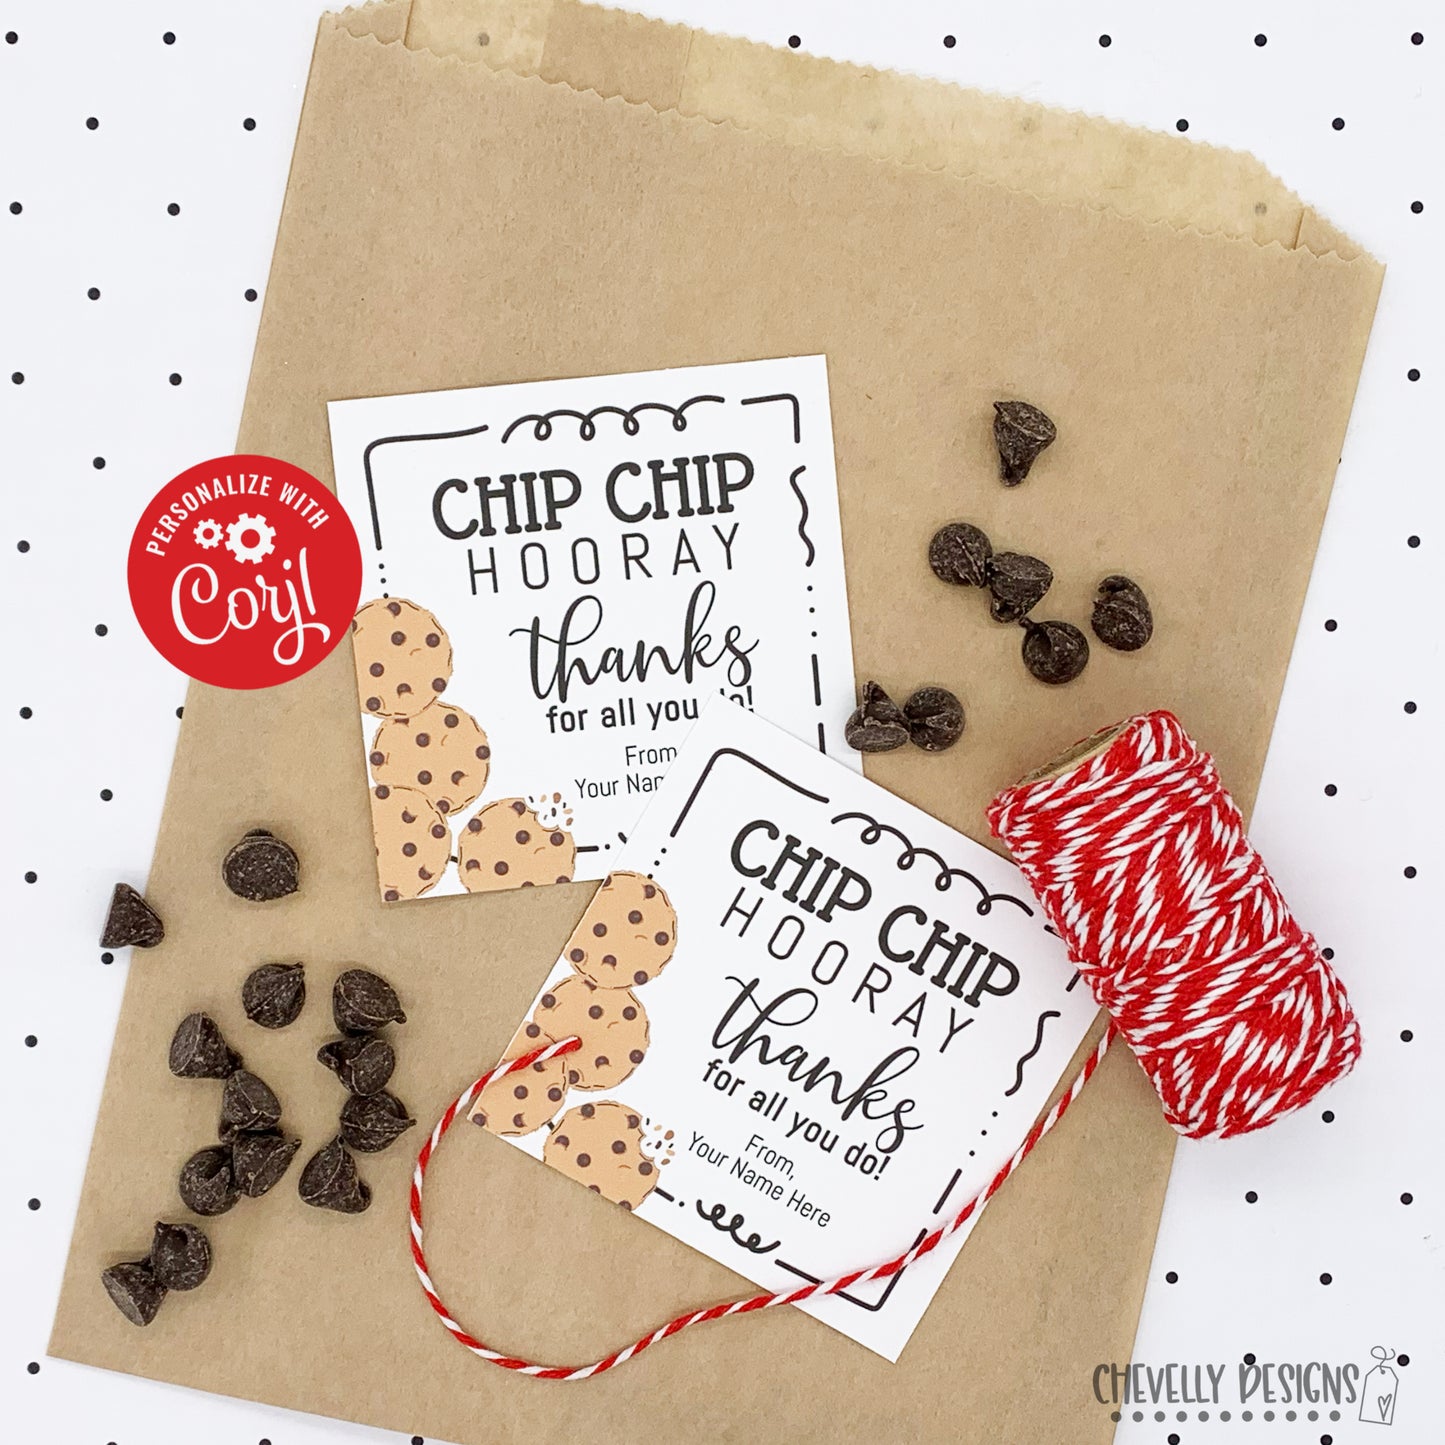 EDITABLE - Chip Chip Hooray - Thank You Cookie Appreciation Gift Tags - Printable Digital File